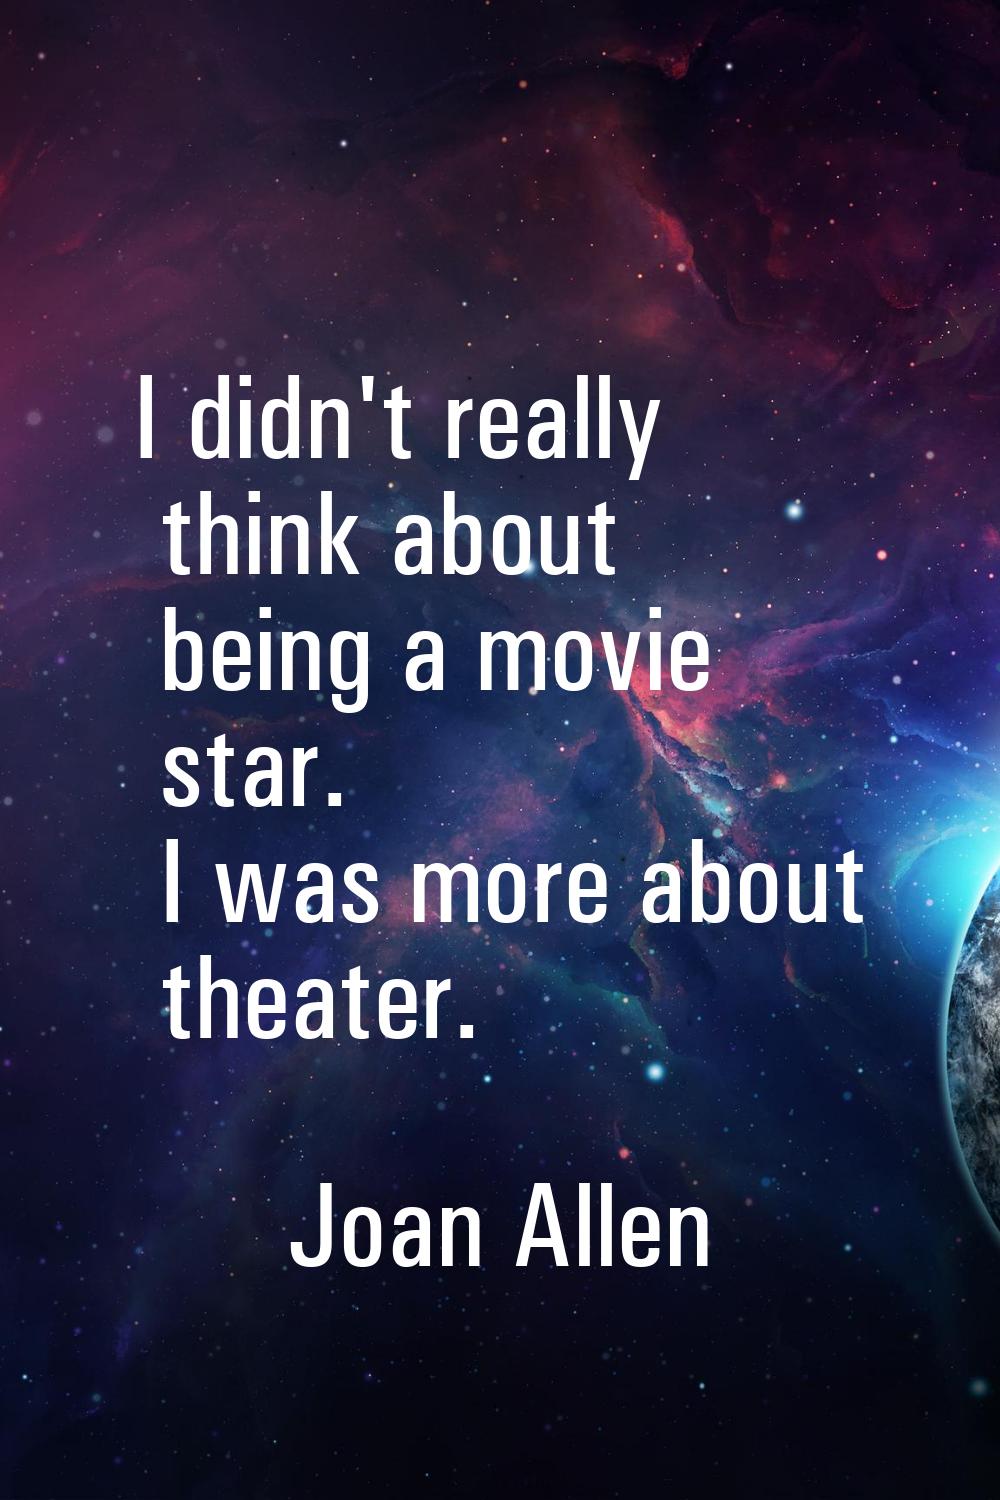 I didn't really think about being a movie star. I was more about theater.